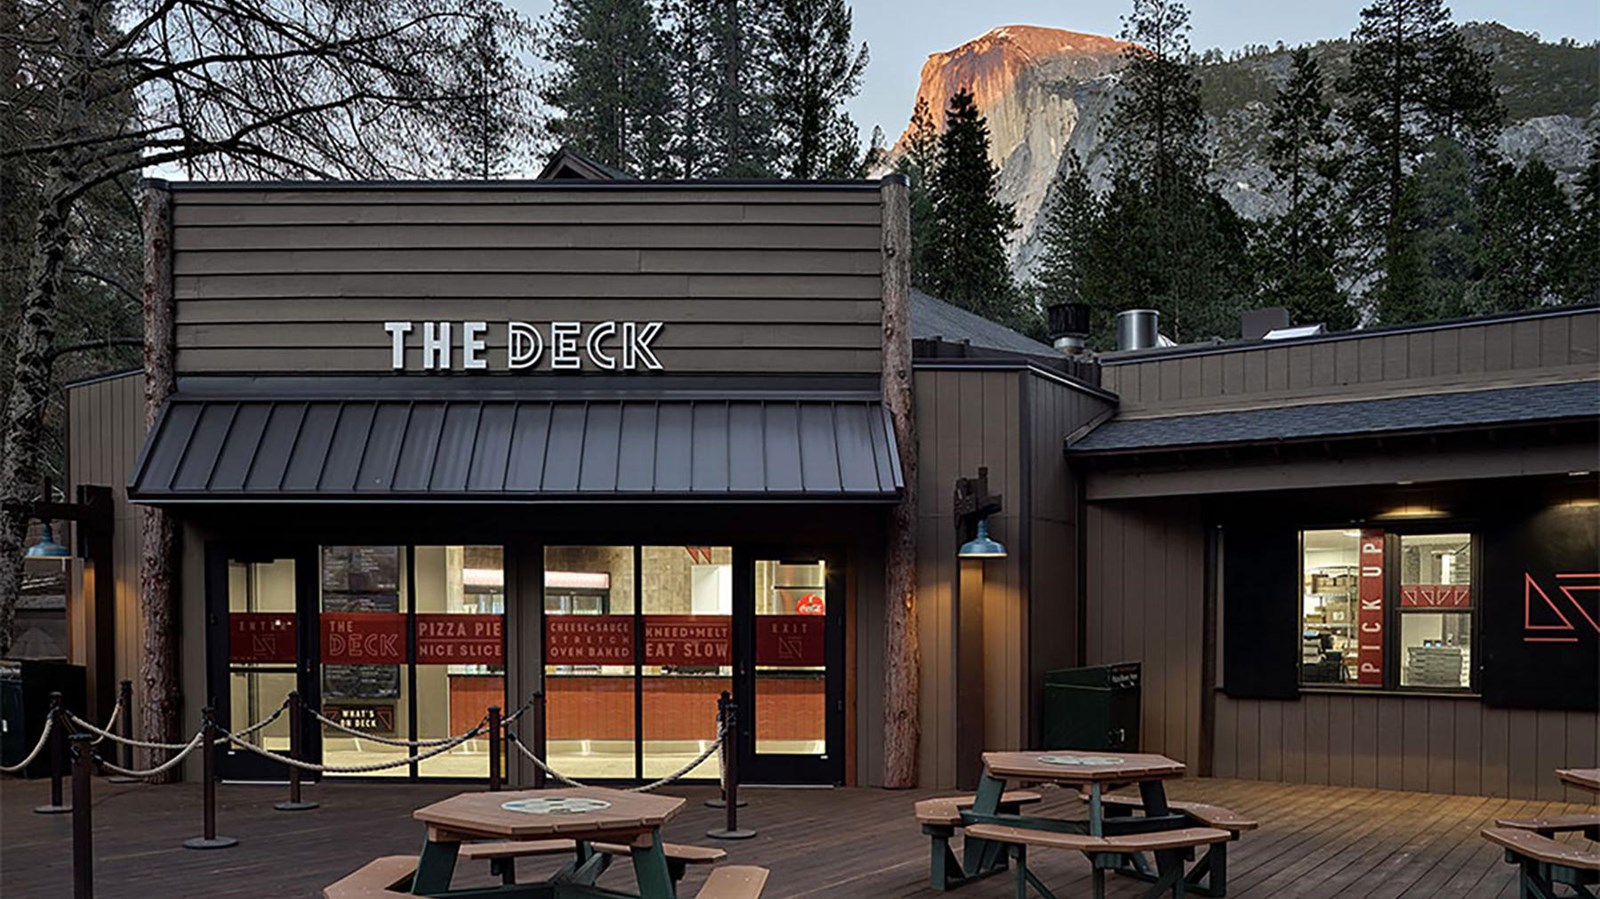 Exterior of the pizza deck with Half Dome in the background